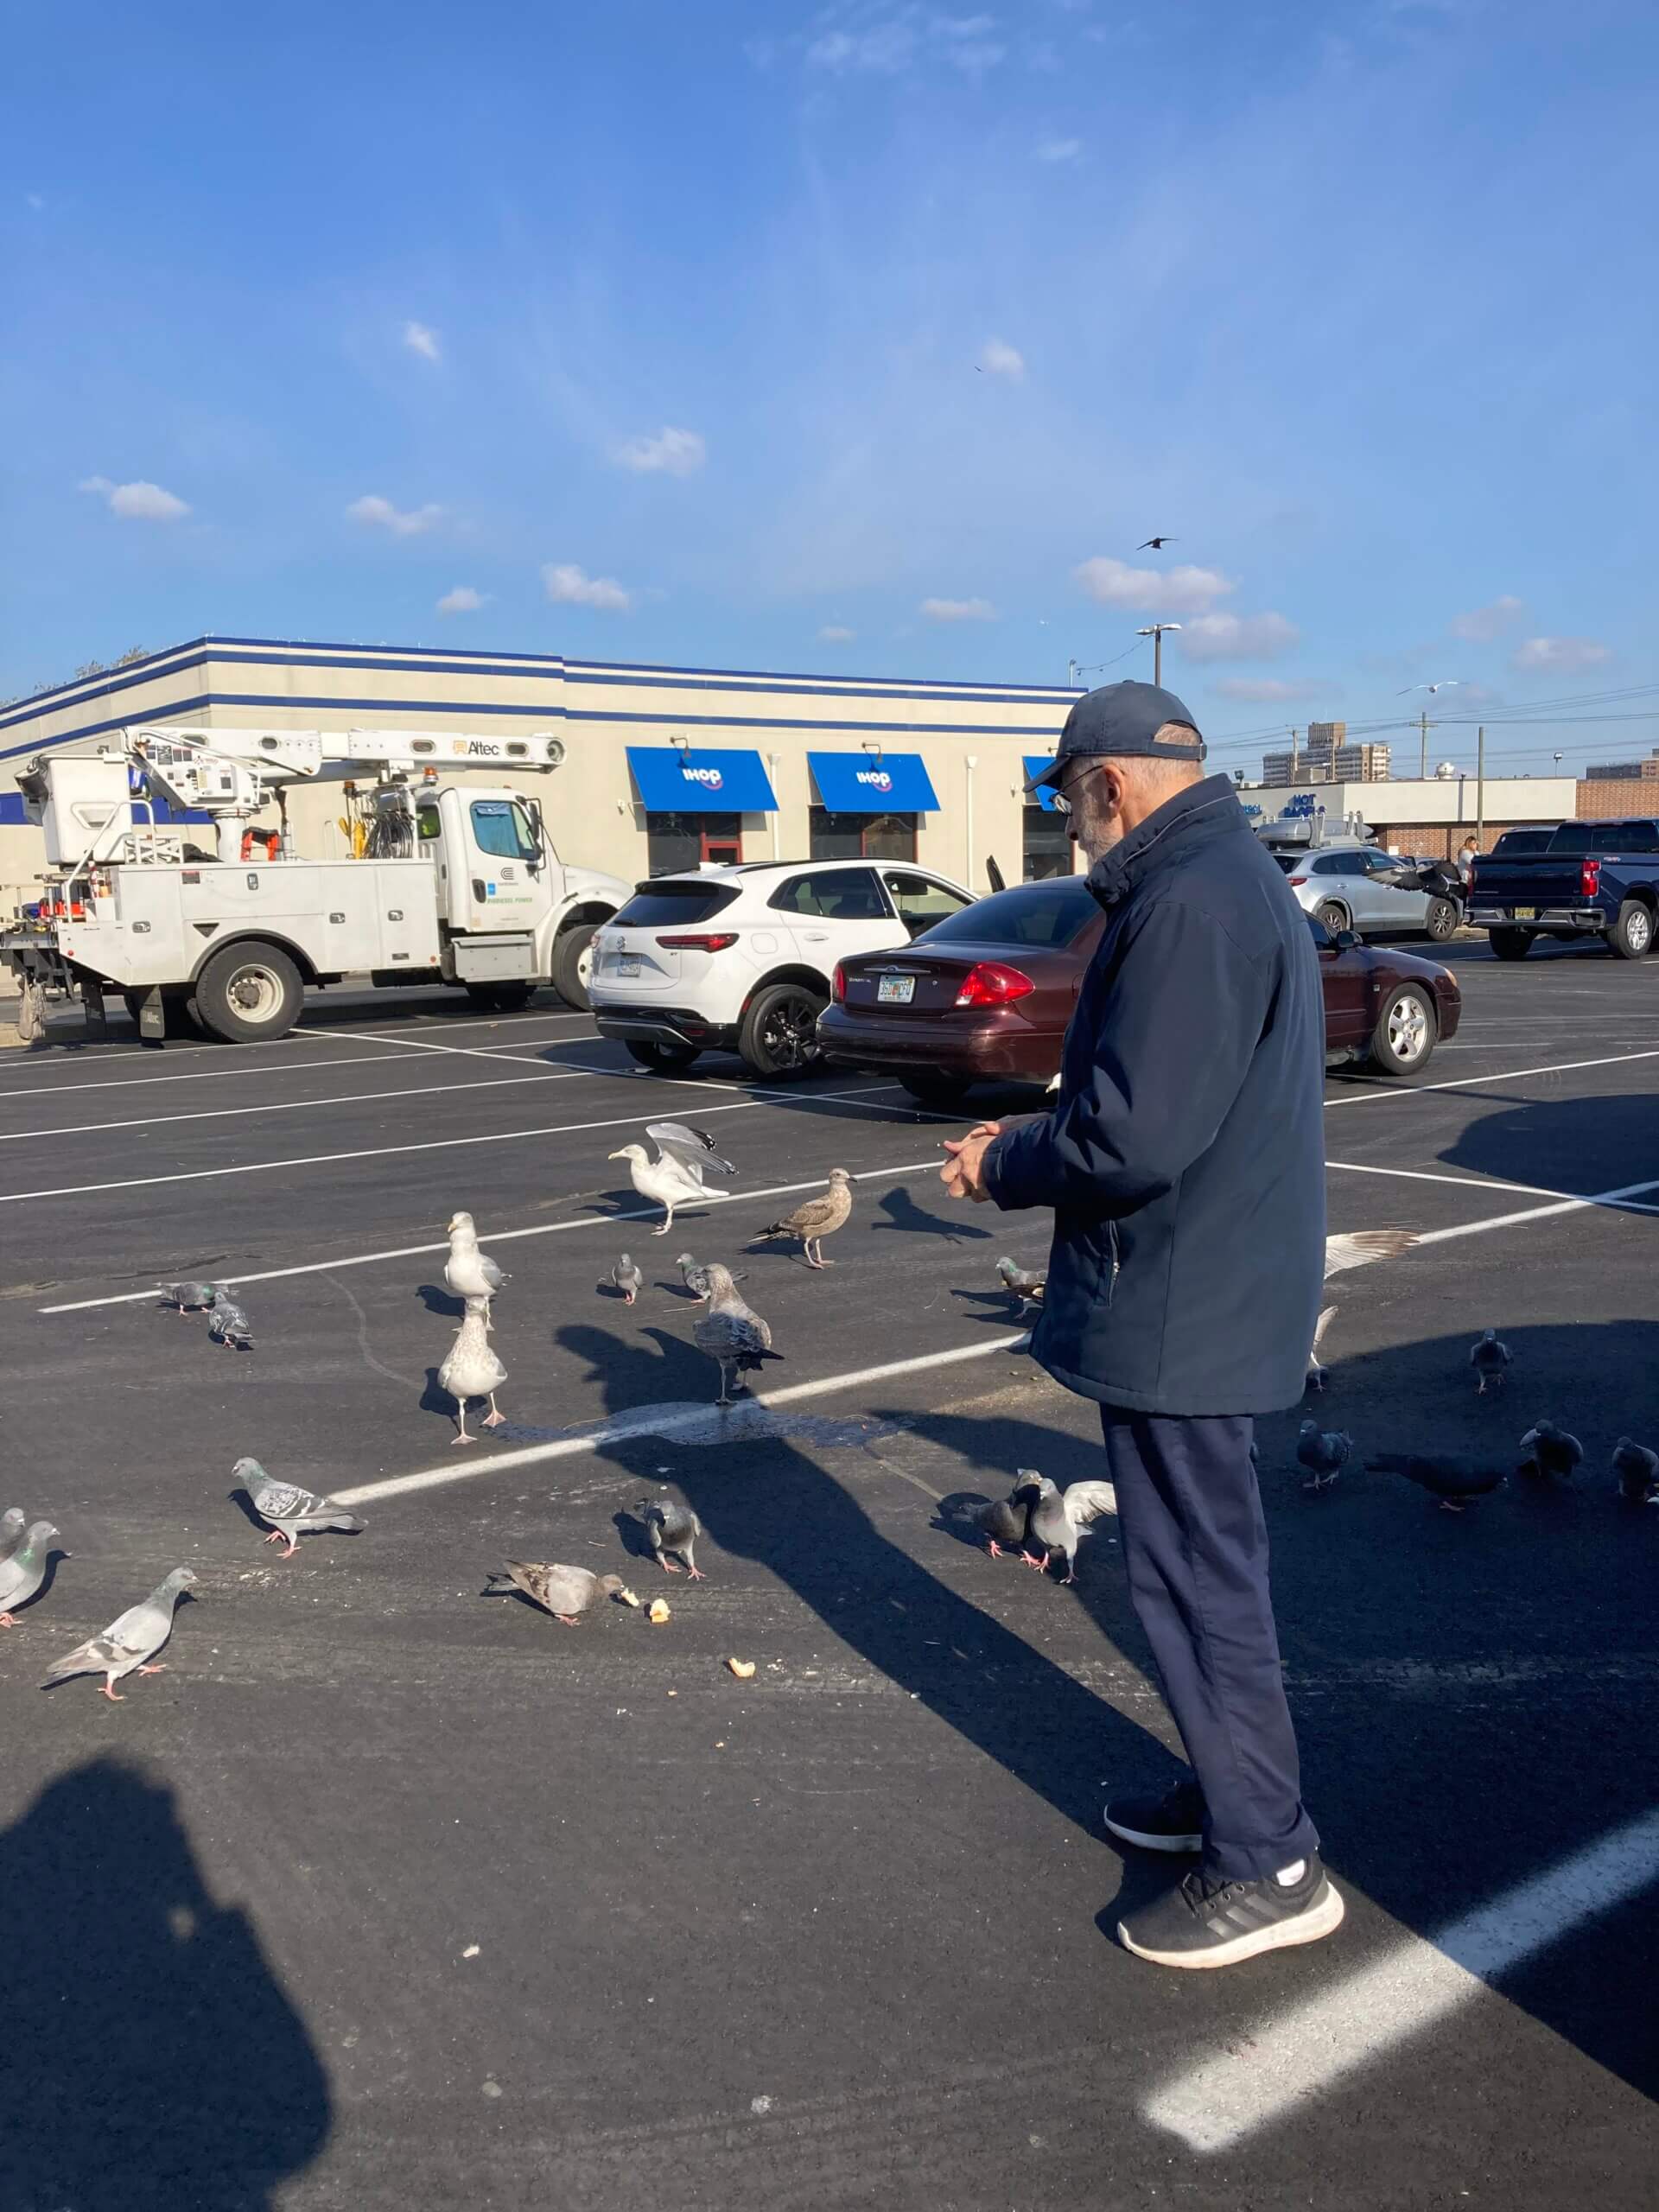 A man wearing navy blue clothes tosses dog food to pigeons and gulls in a parking lot.